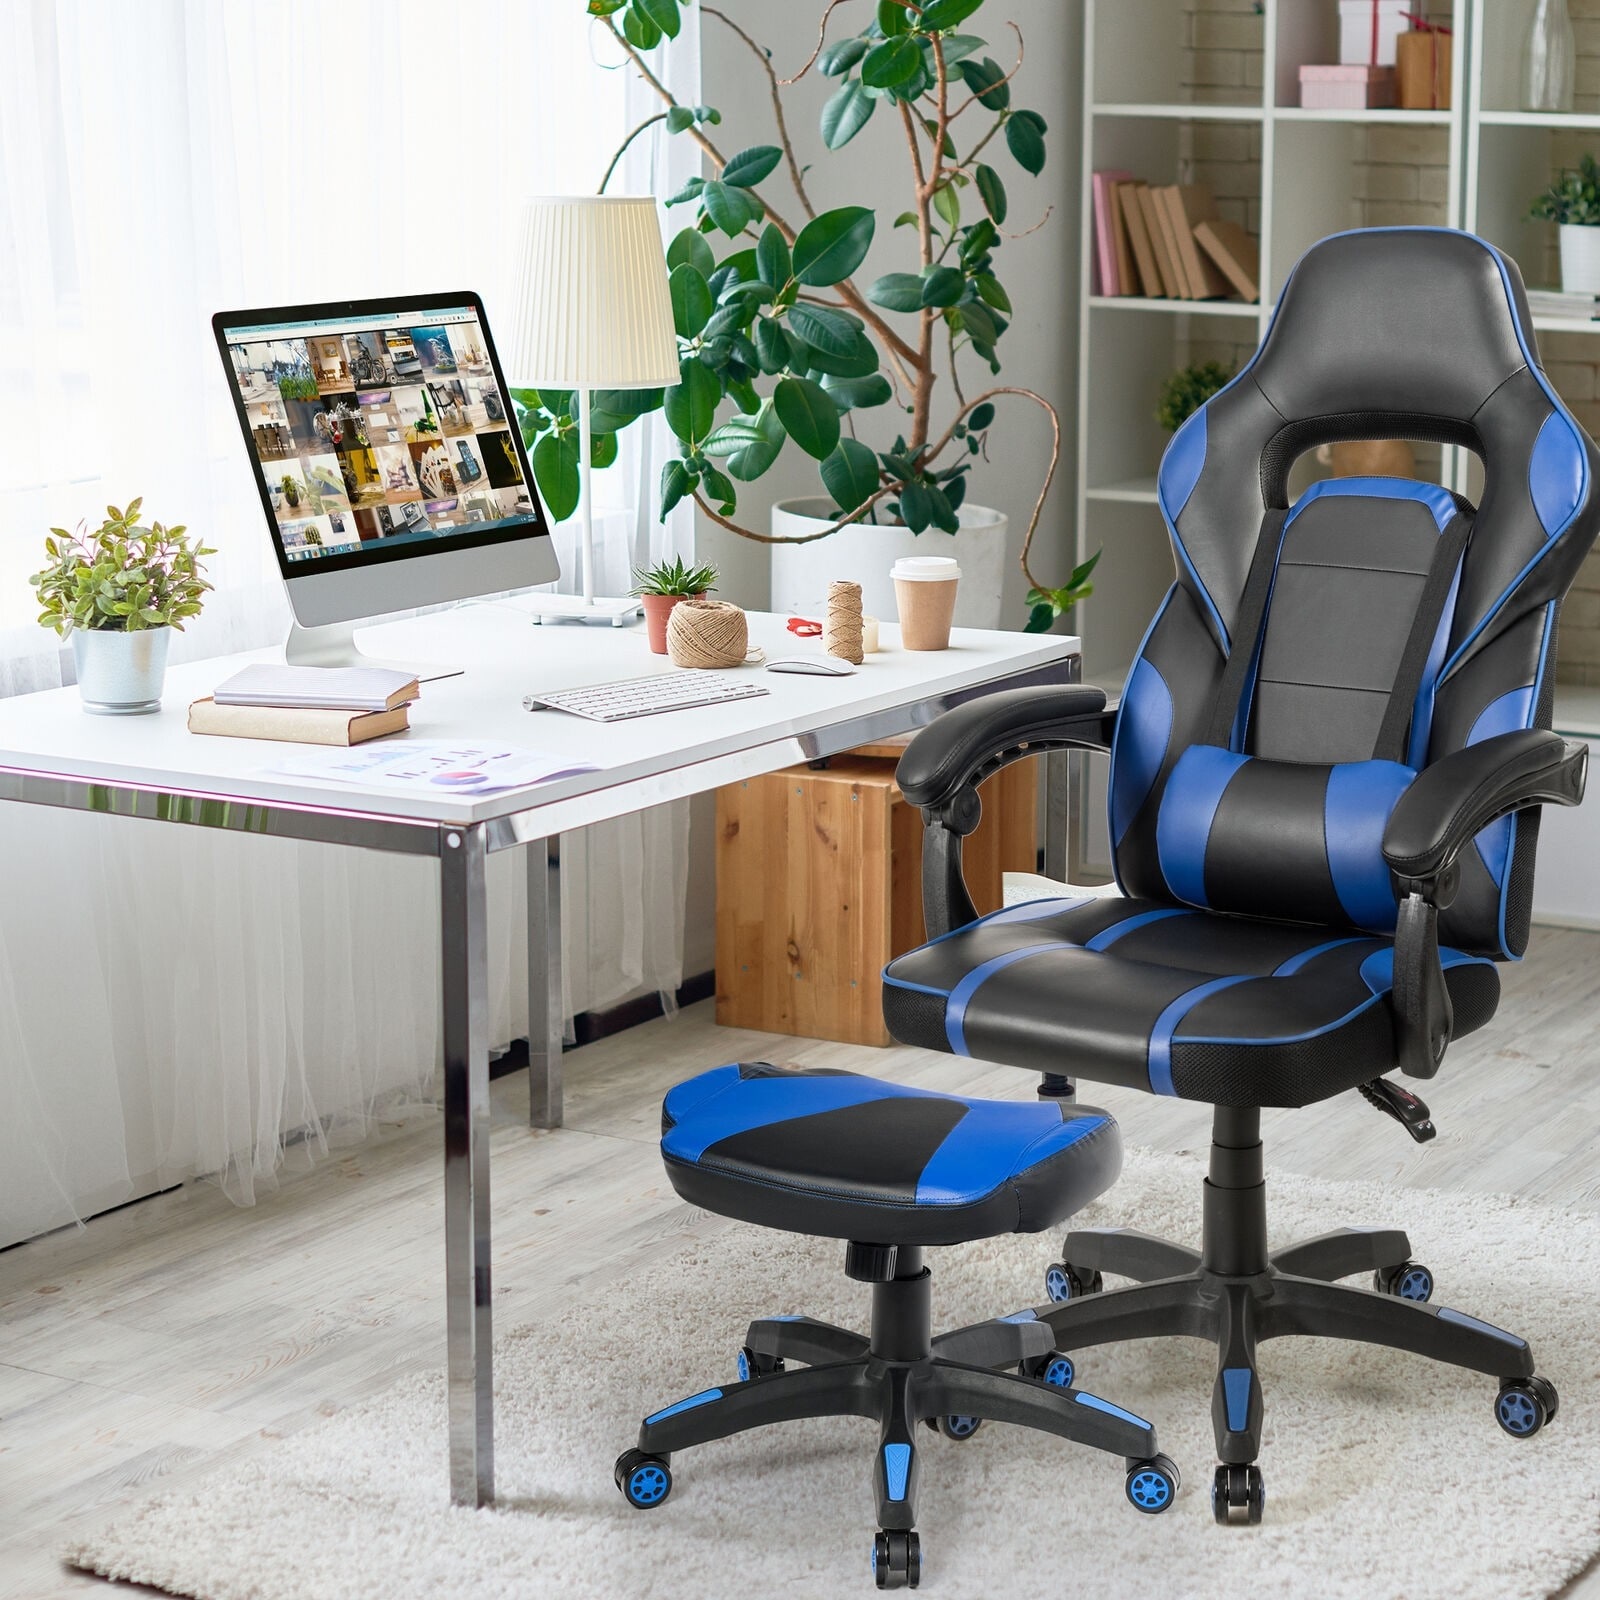 https://ak1.ostkcdn.com/images/products/is/images/direct/127ee8fa80803a85aeb1652b53652335003a750a/Multi-Use-Footrest-Swivel-Height-Adjustable-Gaming-Ottoman-Footstool-Chair.jpg